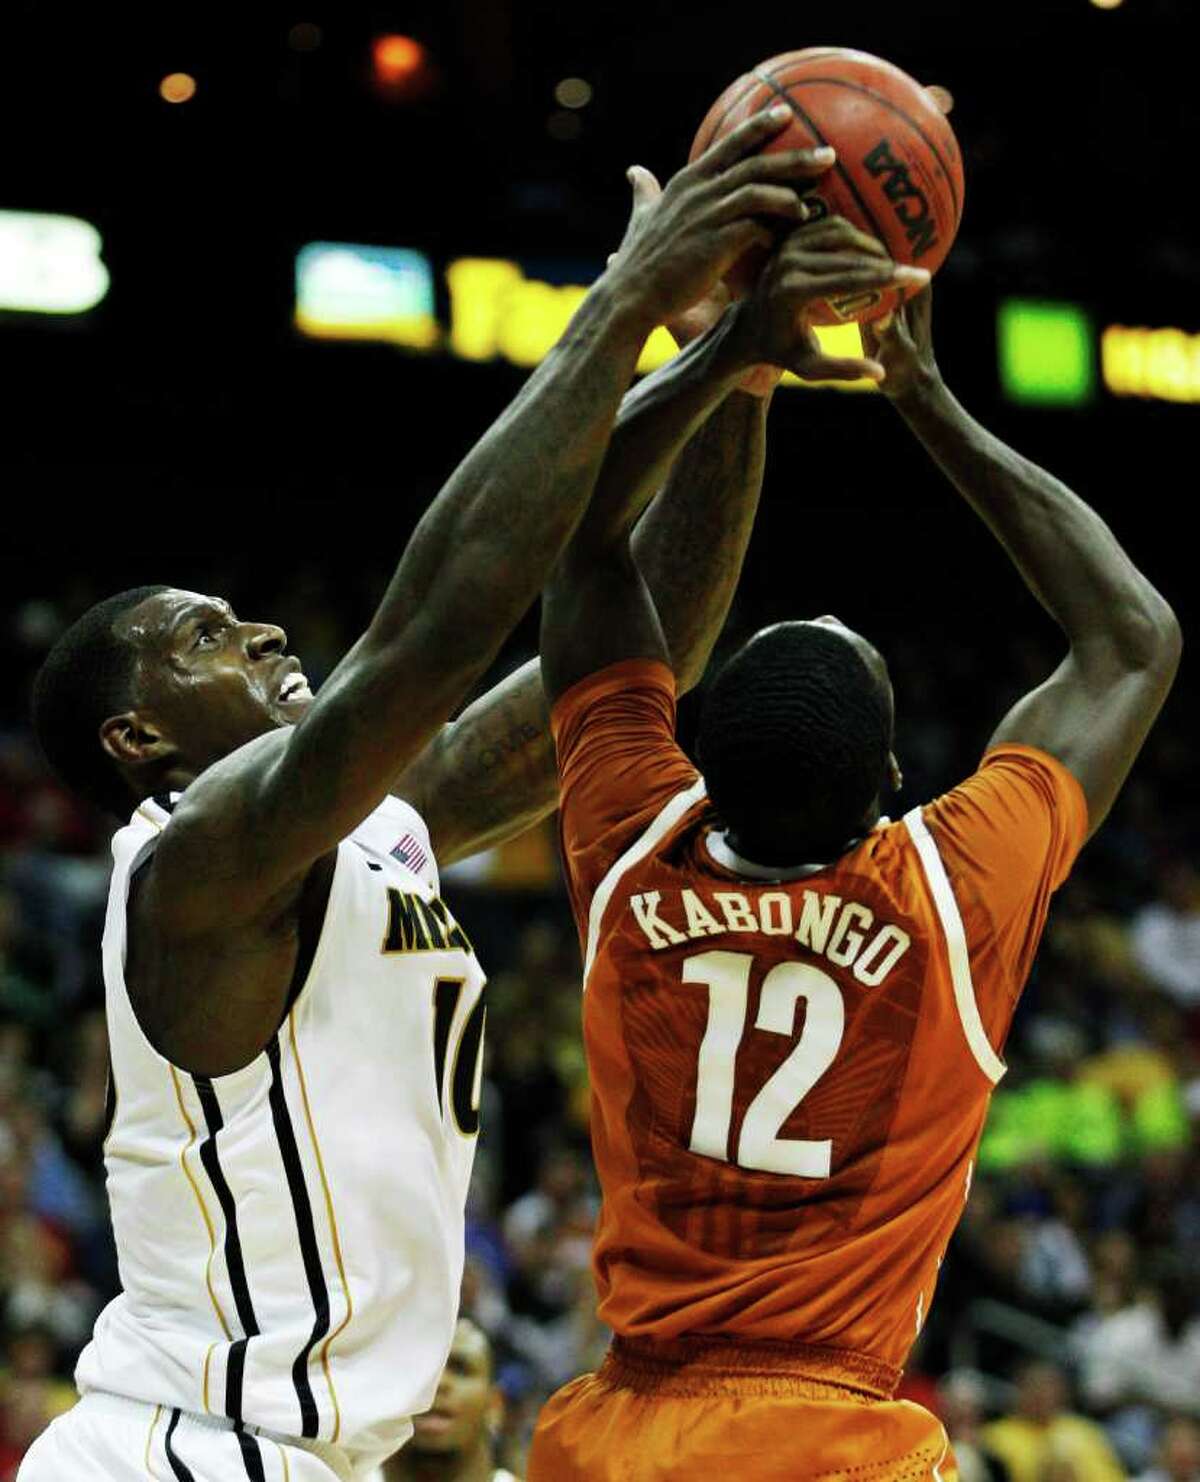 Missouri forward Ricardo Ratliffe (10) battles for a rebound with Texas guard Myck Kabongo (12) during the first half of an NCAA college basketball game in the Big 12 Conference tournament Friday, March 9, 2012, in Kansas City, Mo.